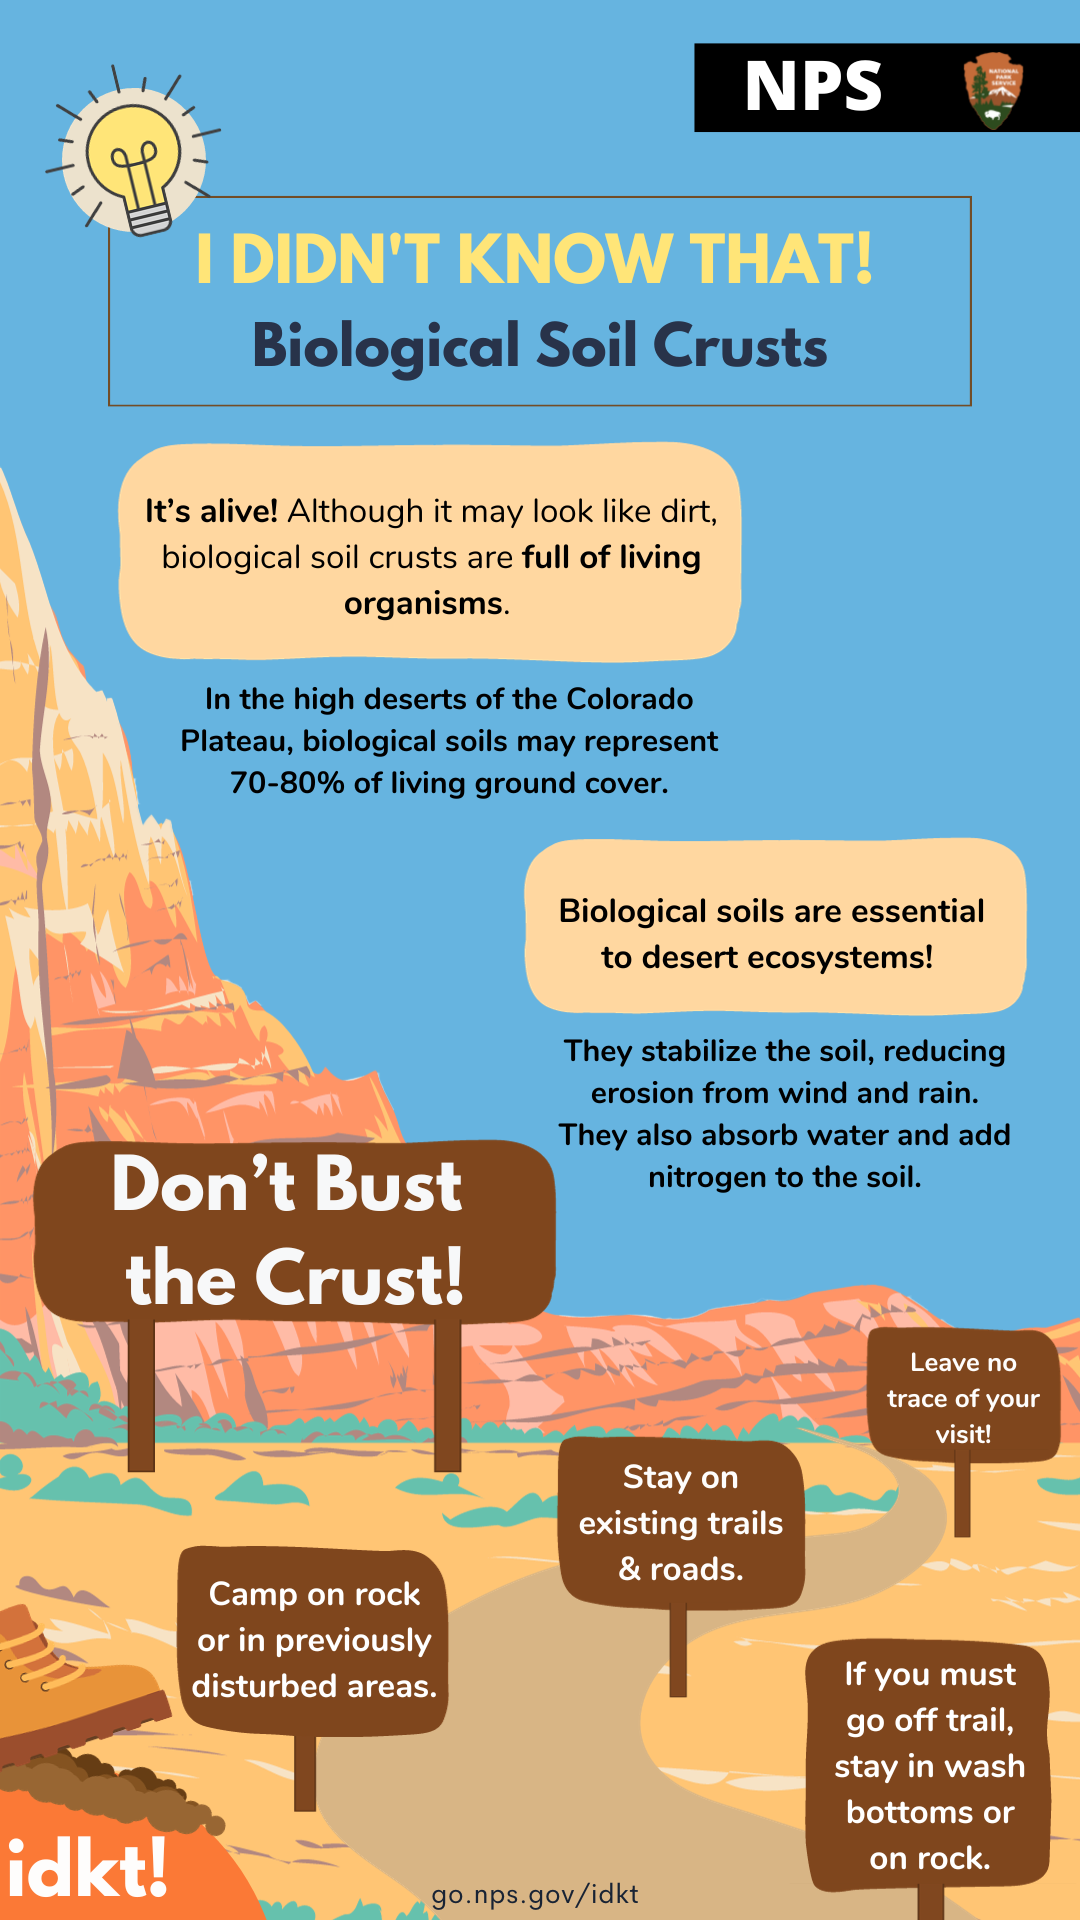 an infographic describing biological soil crusts - full alt text available below image